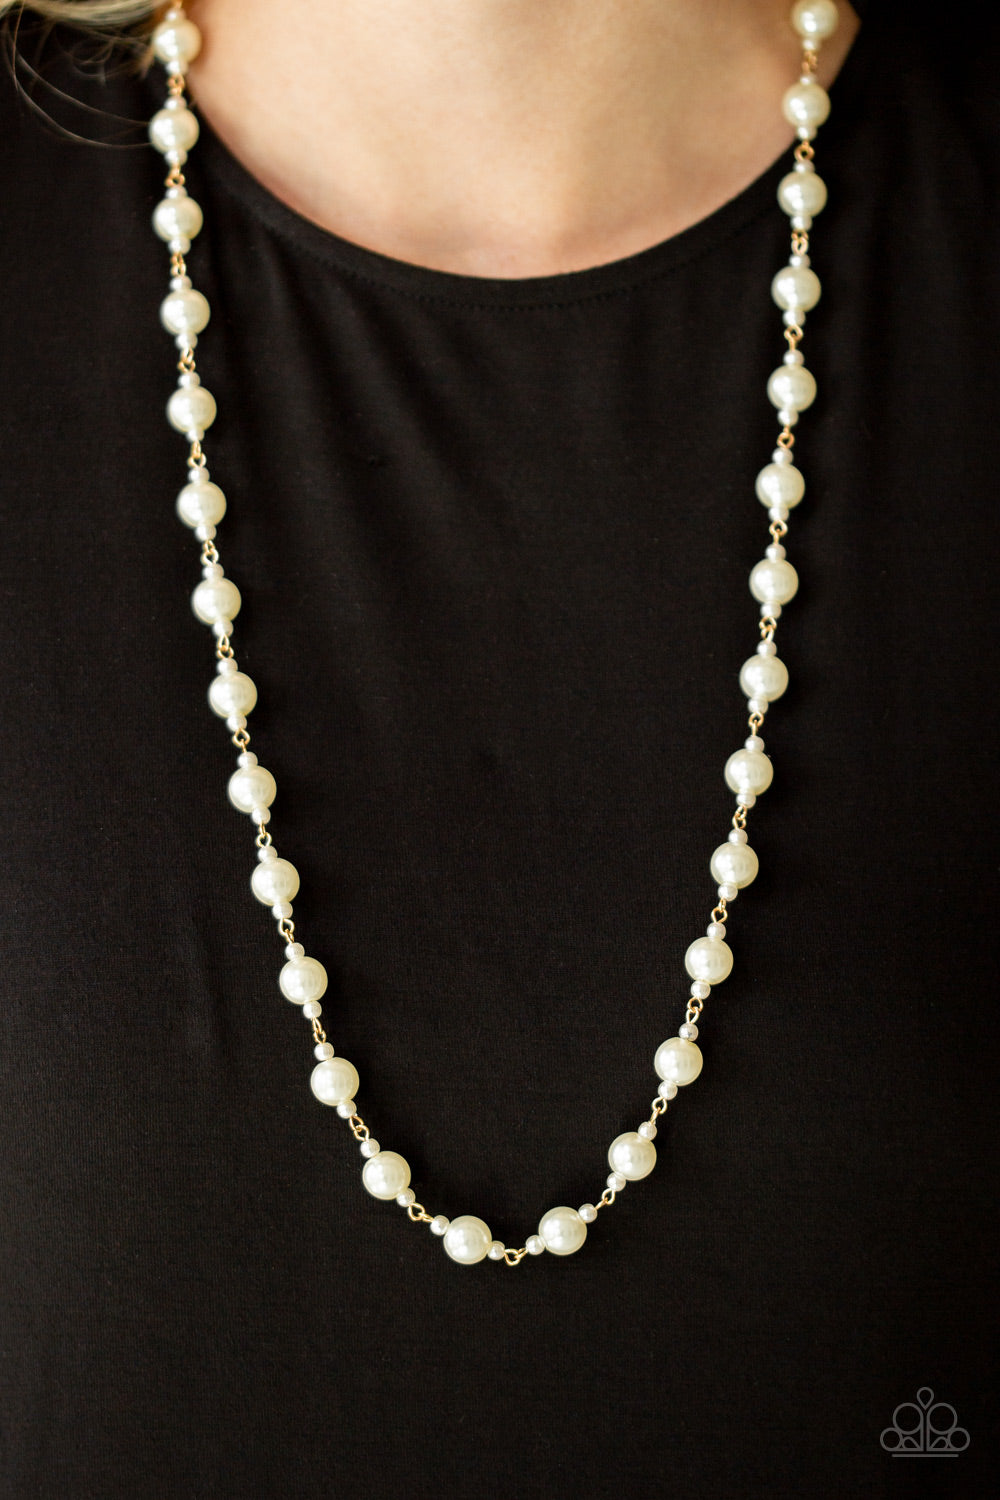 Paparazzi Accessories - Behind The Scenes - Gold (Pearl) Necklace